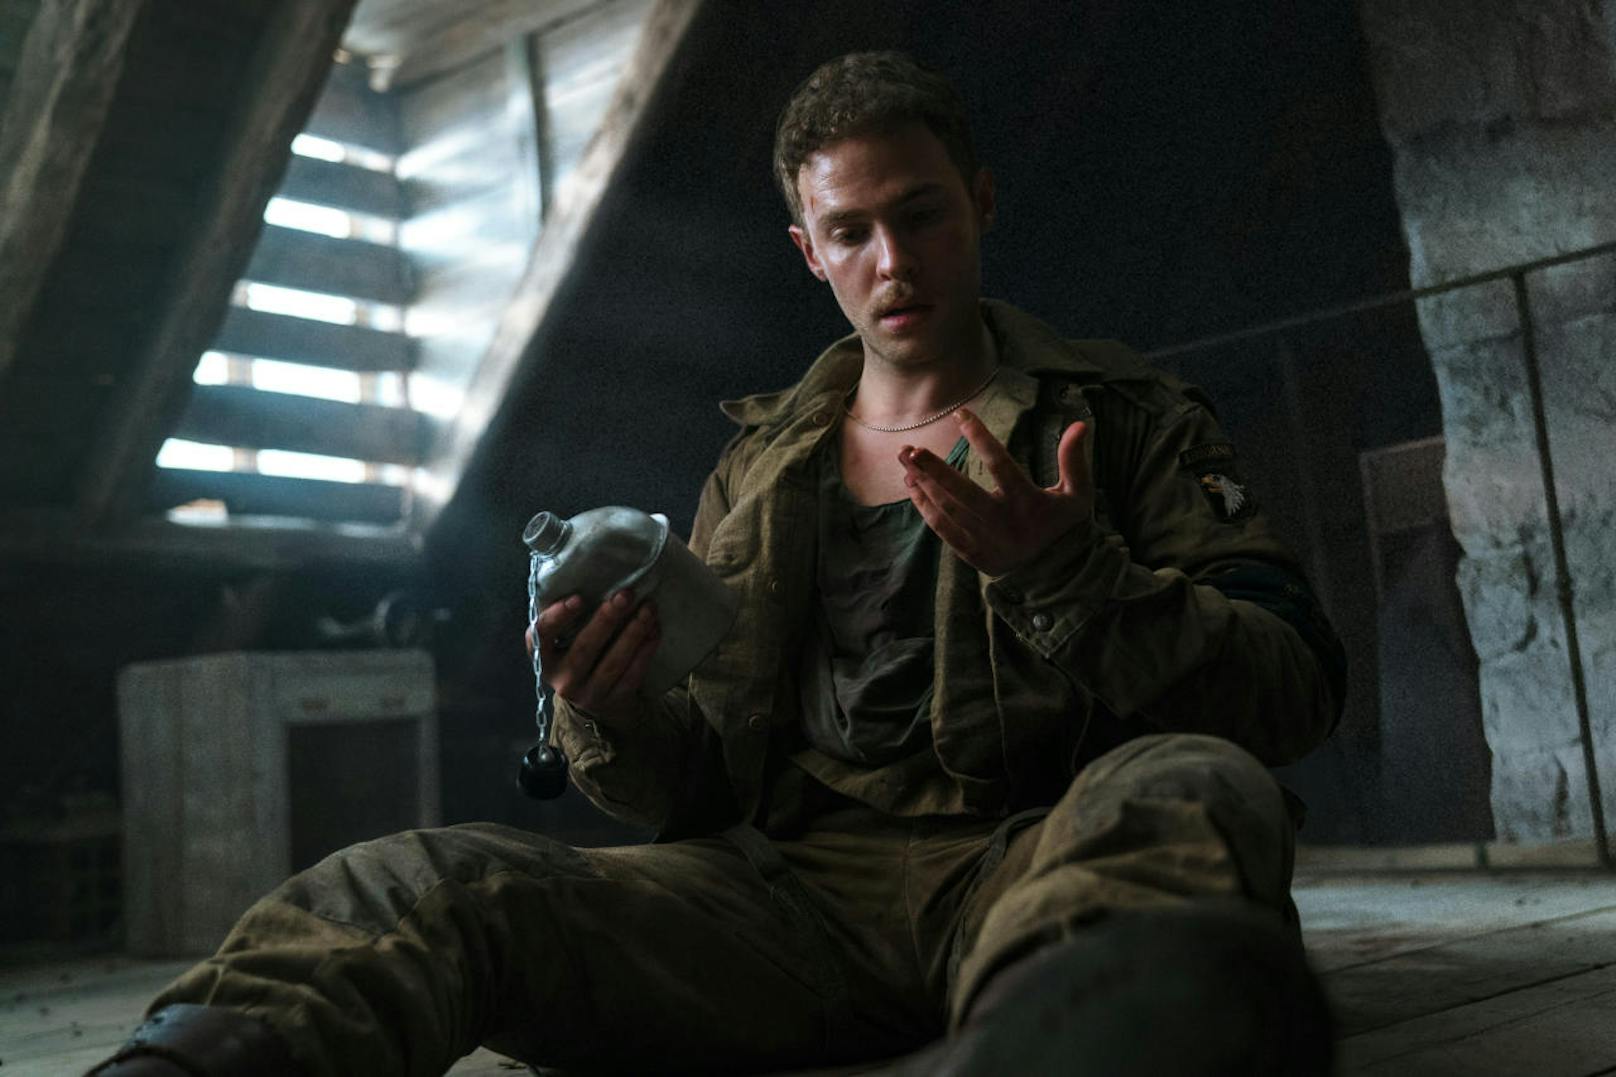 Iain De Caestecker als Chase in "Operation: Overlord"